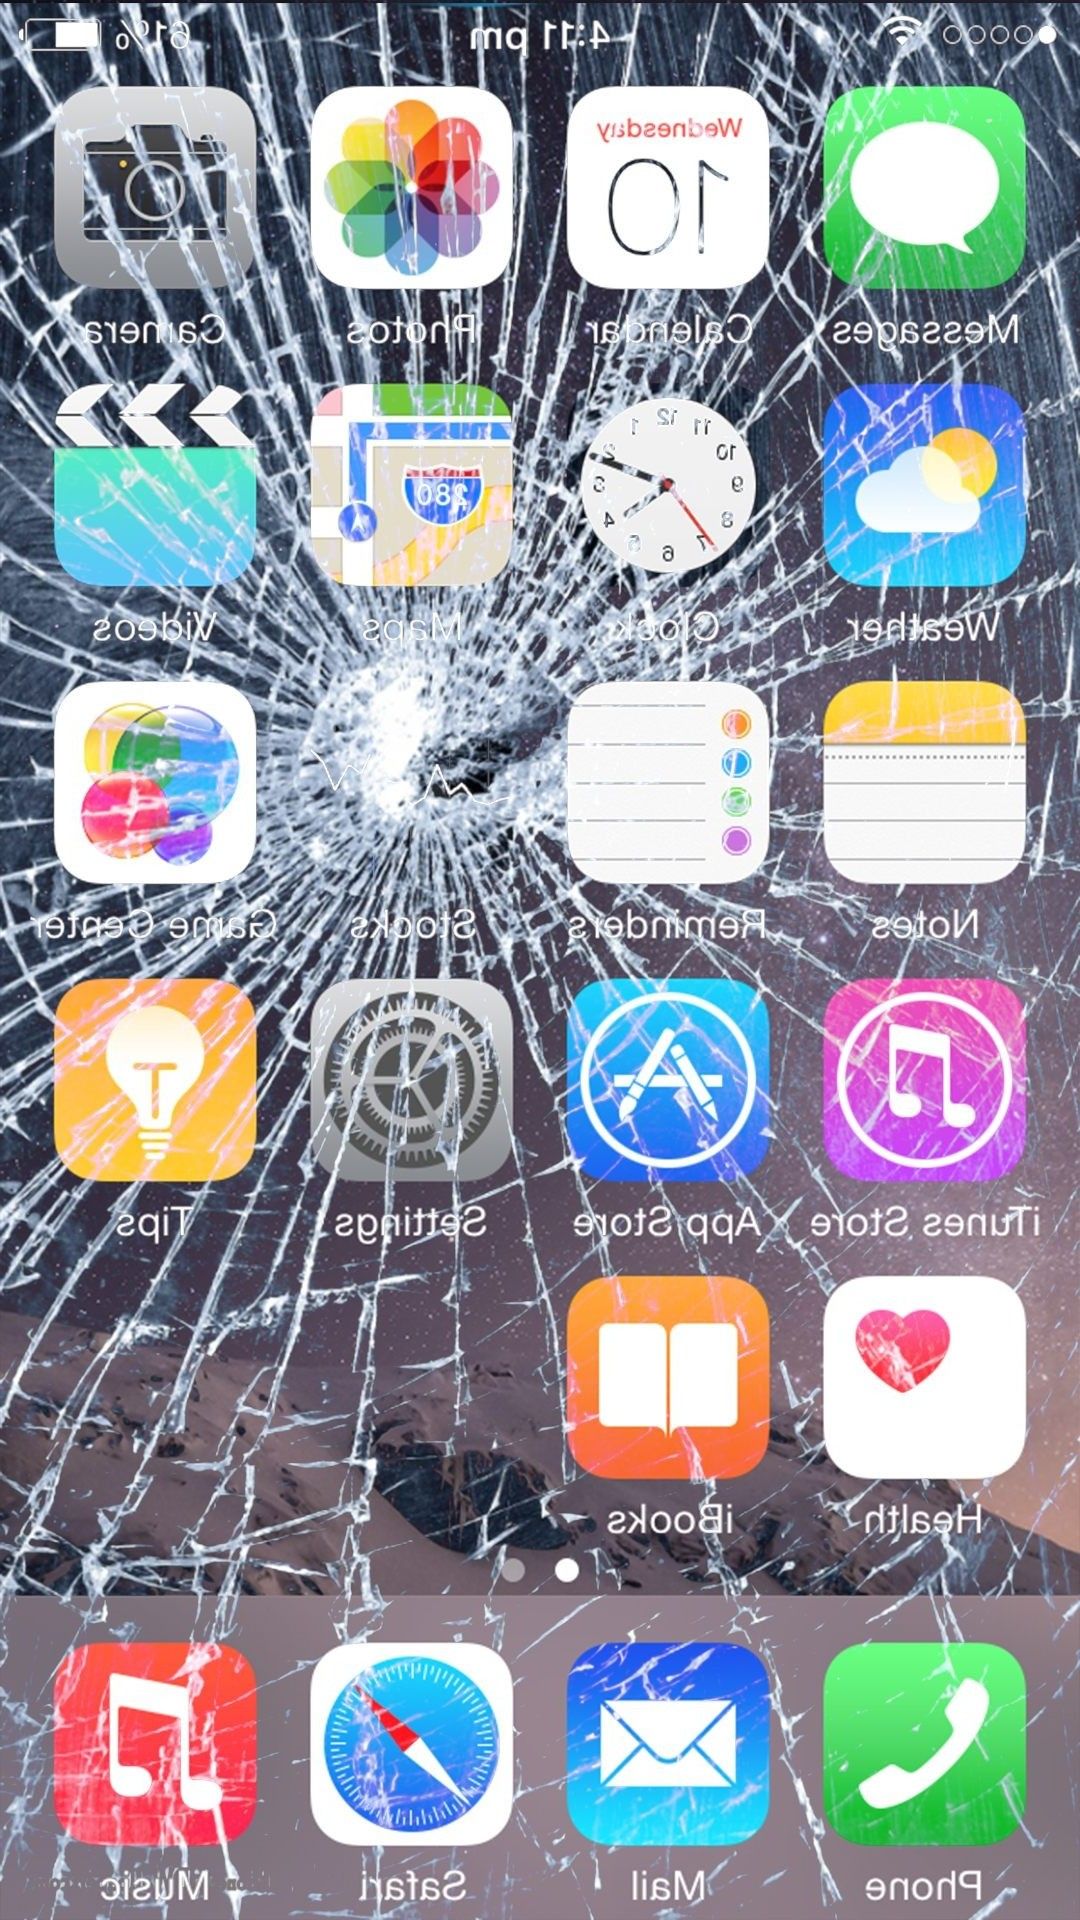 iPhone Cracked Screen Wallpapers on WallpaperDog